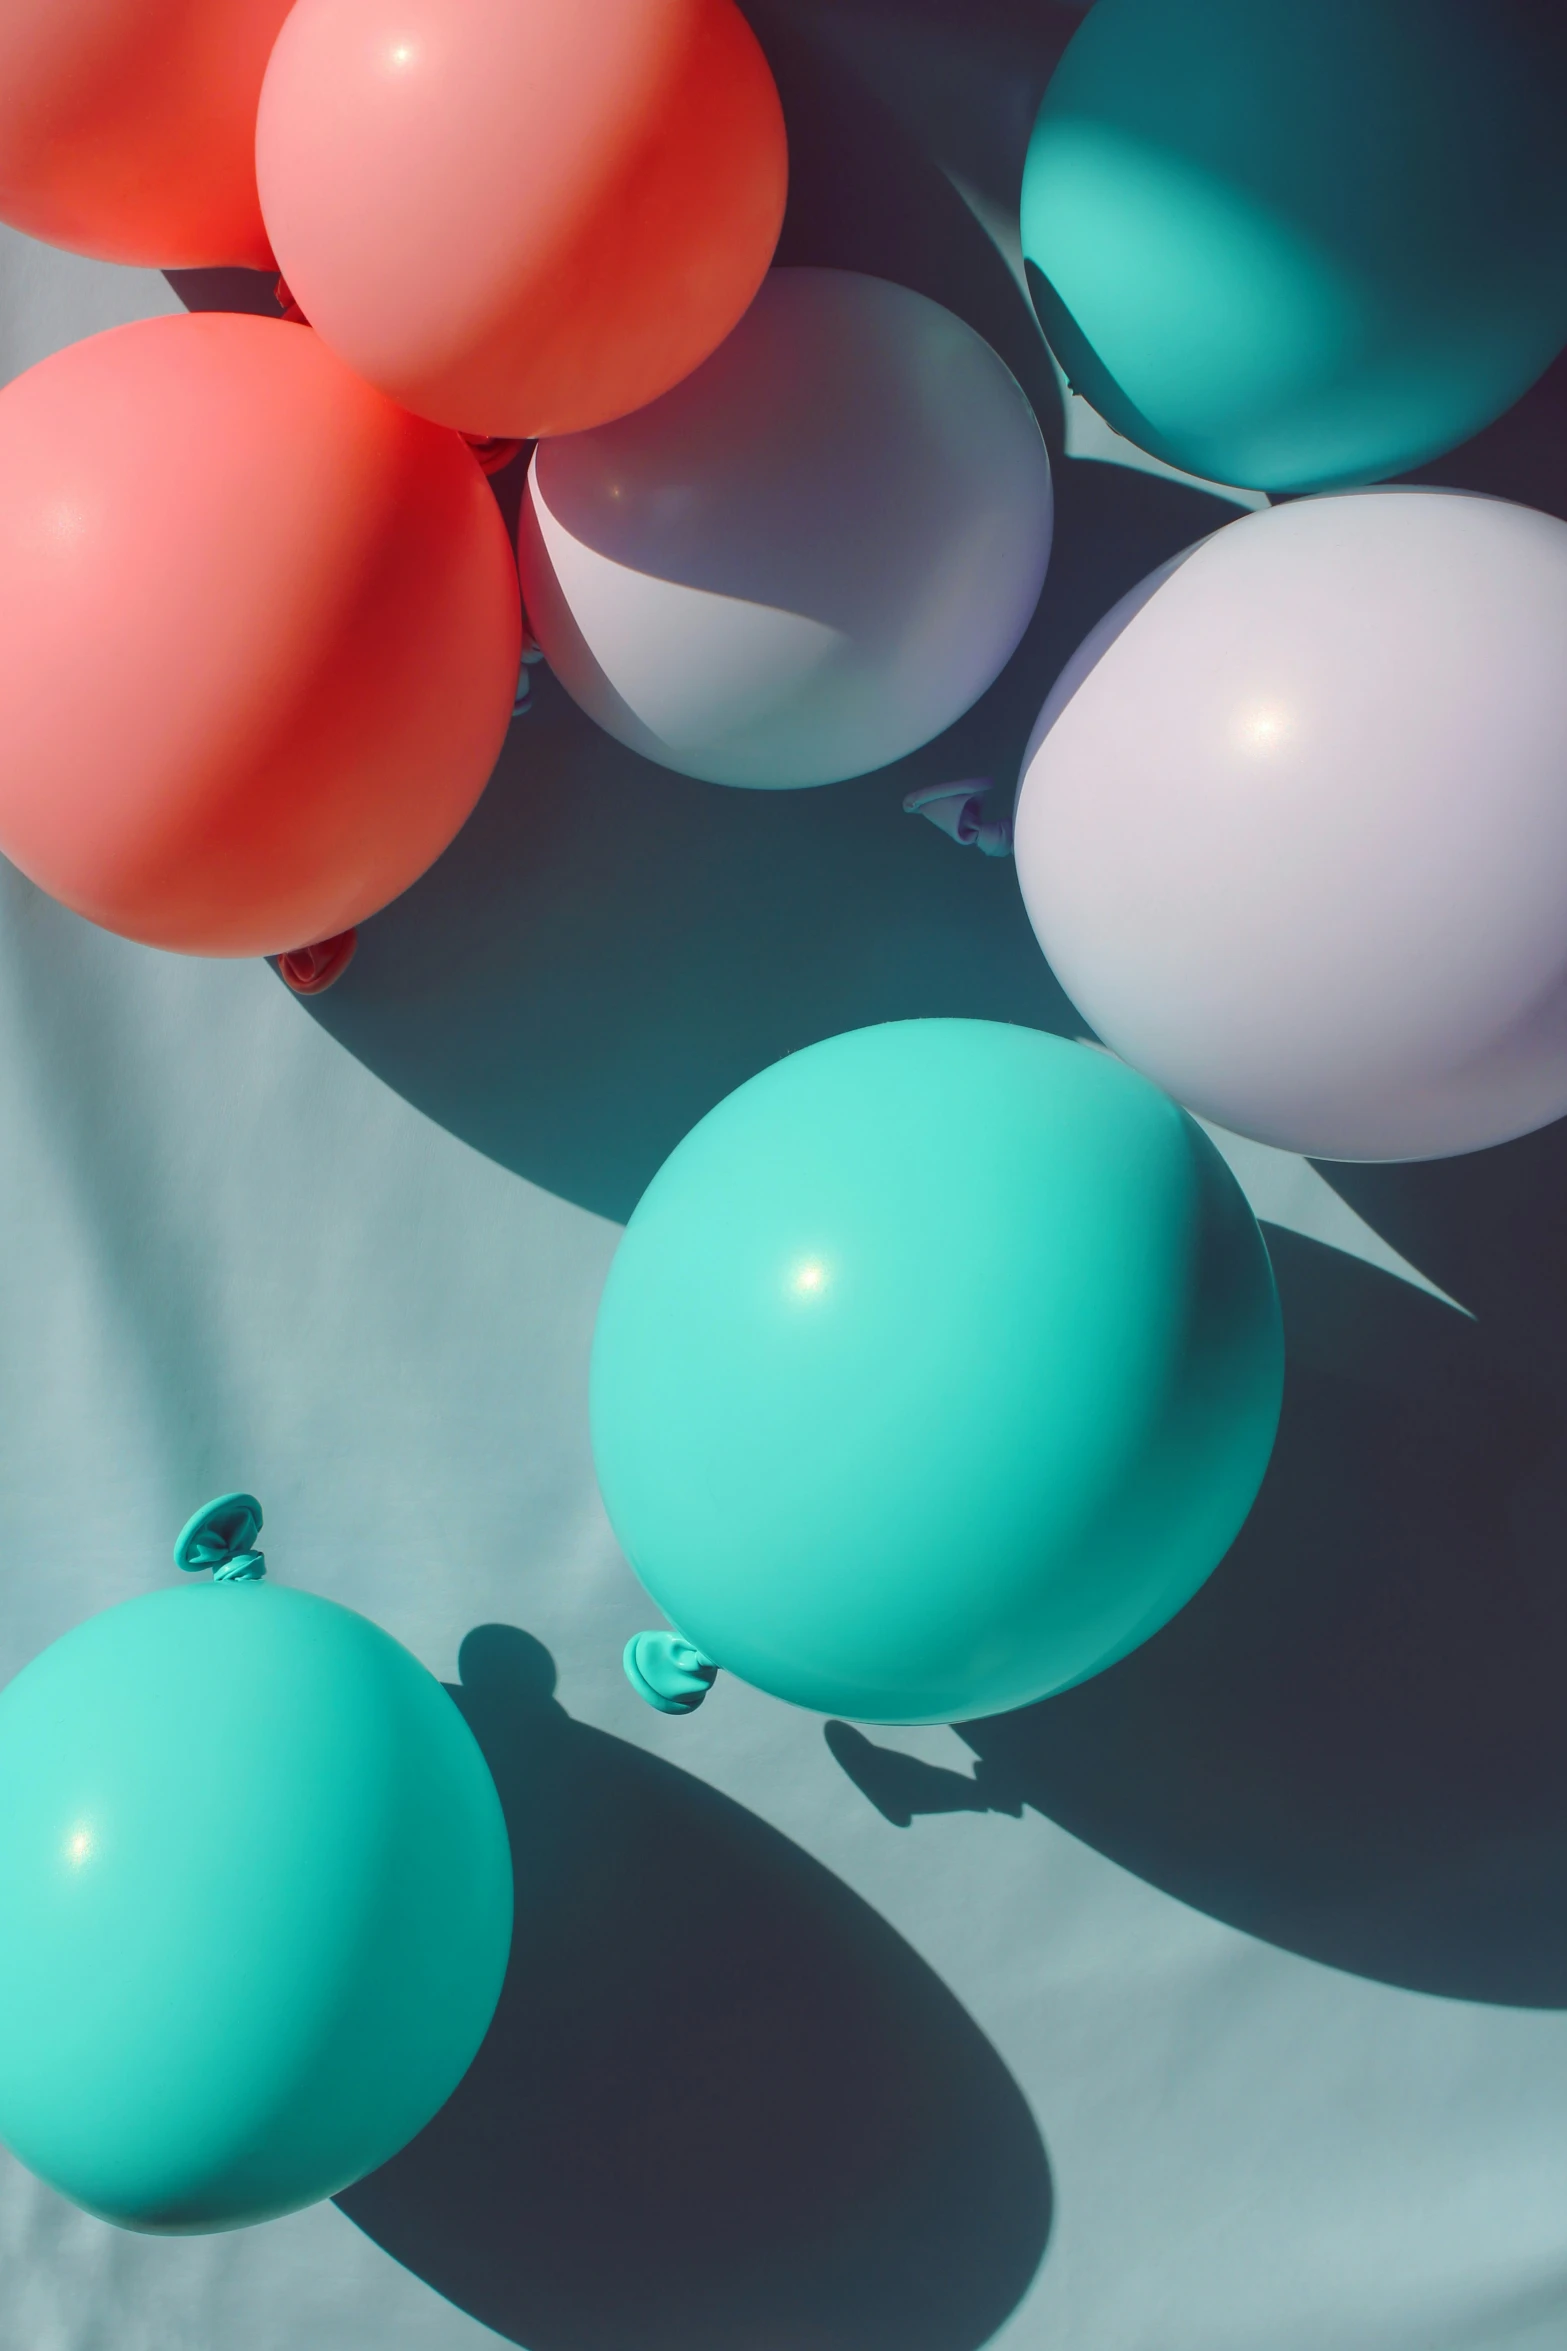 a group of balloons floating on a blue and white background